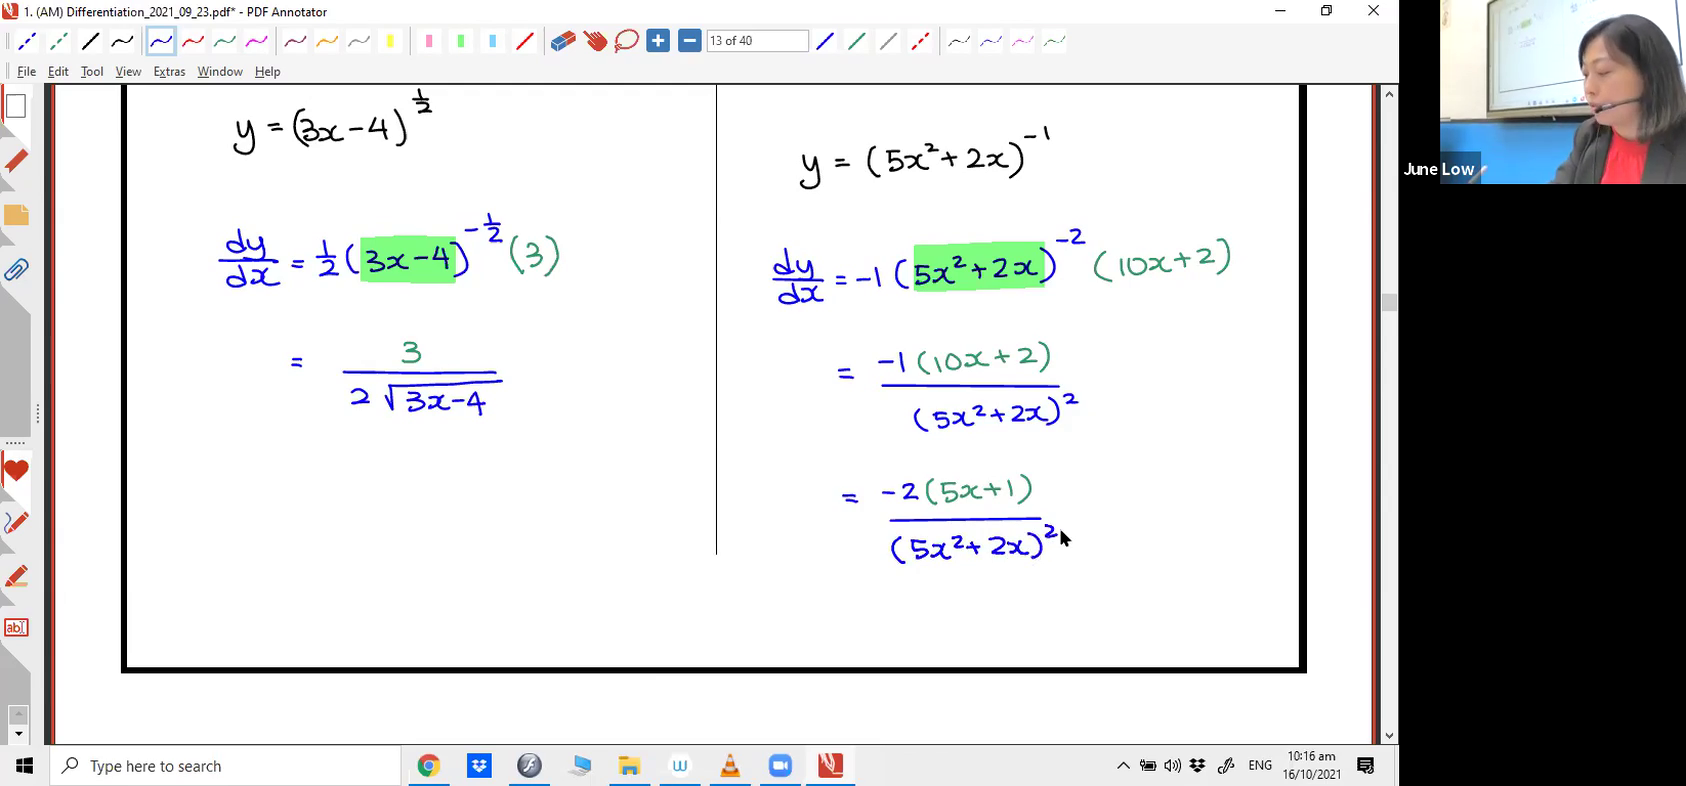 [DIFFERENTIATION] Chain Rule